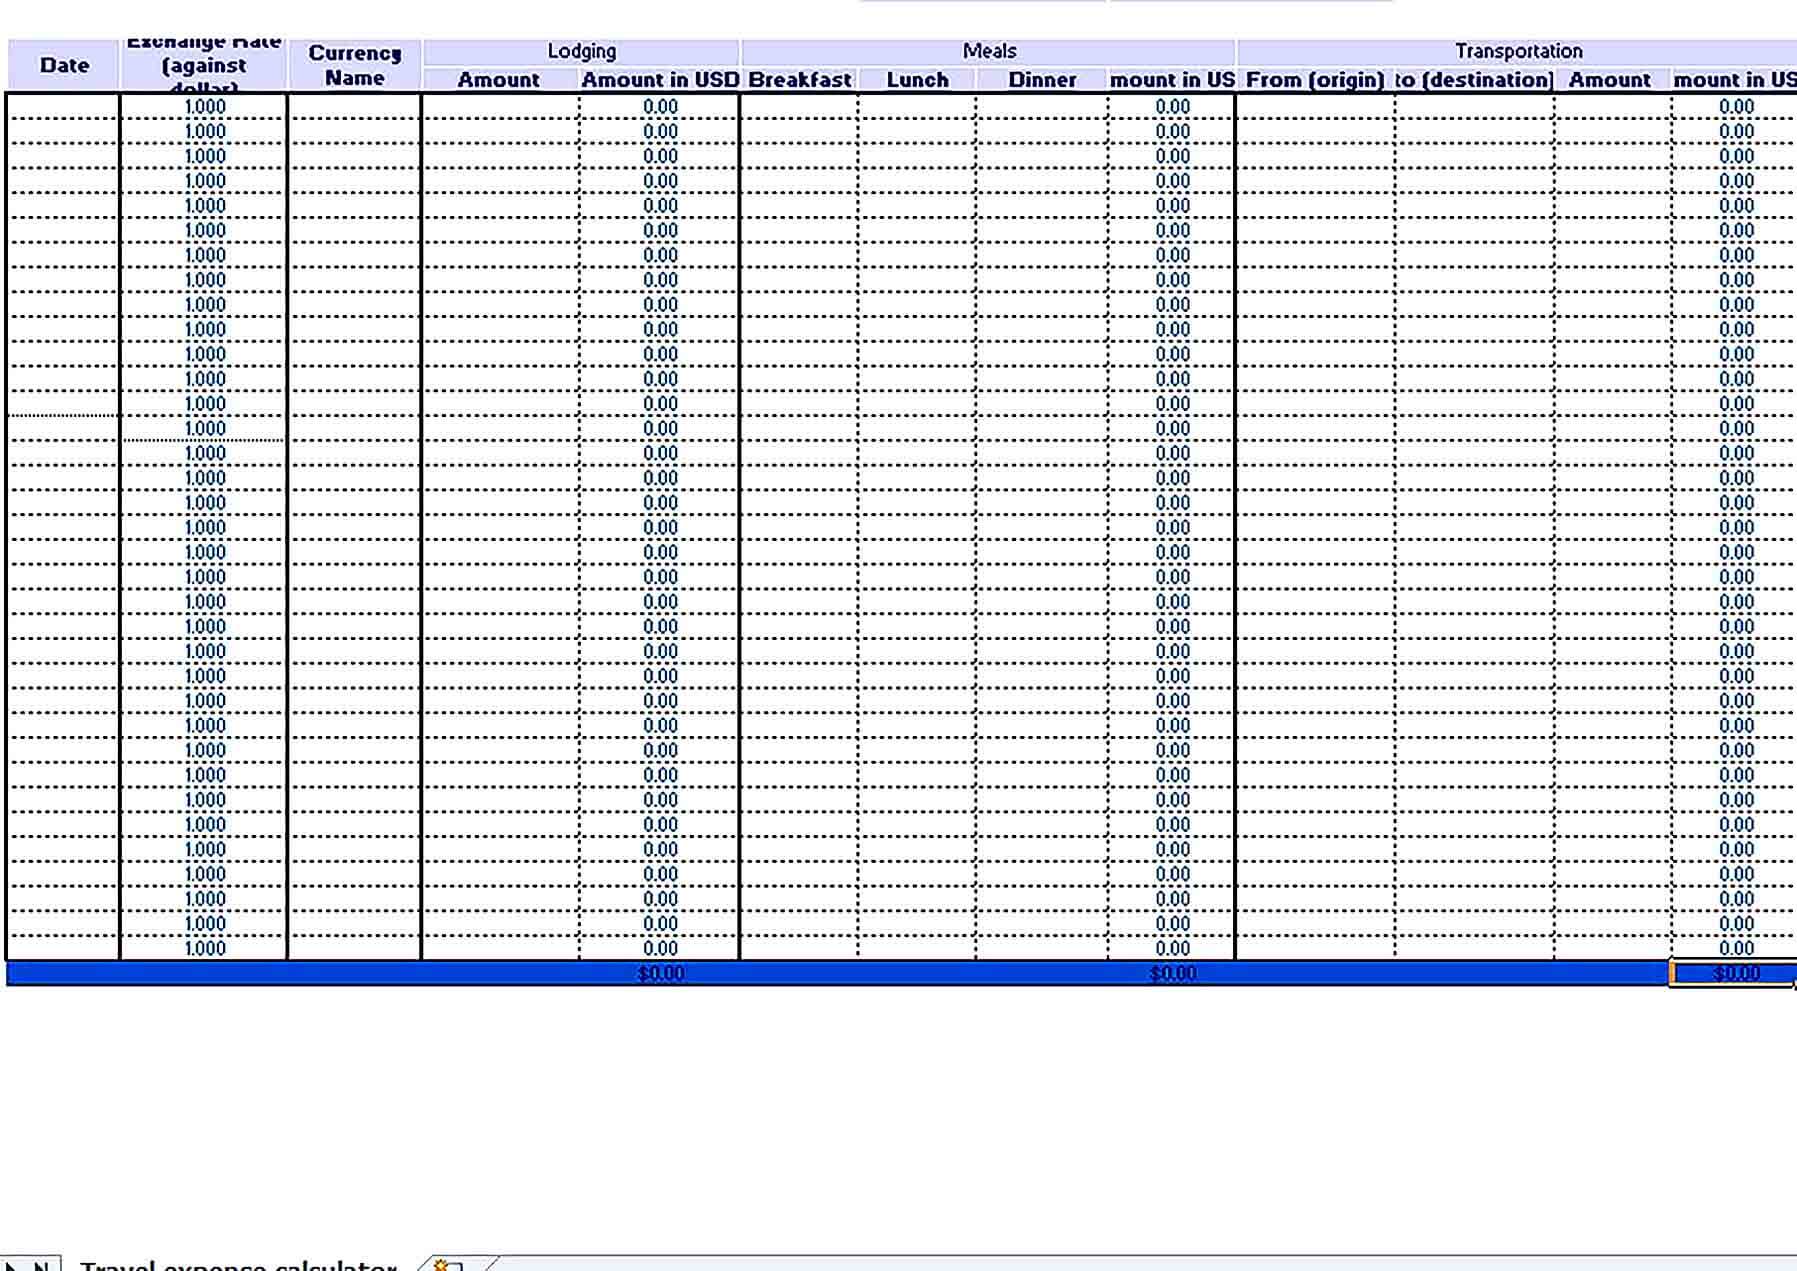 Sample Excel Expense Report Template